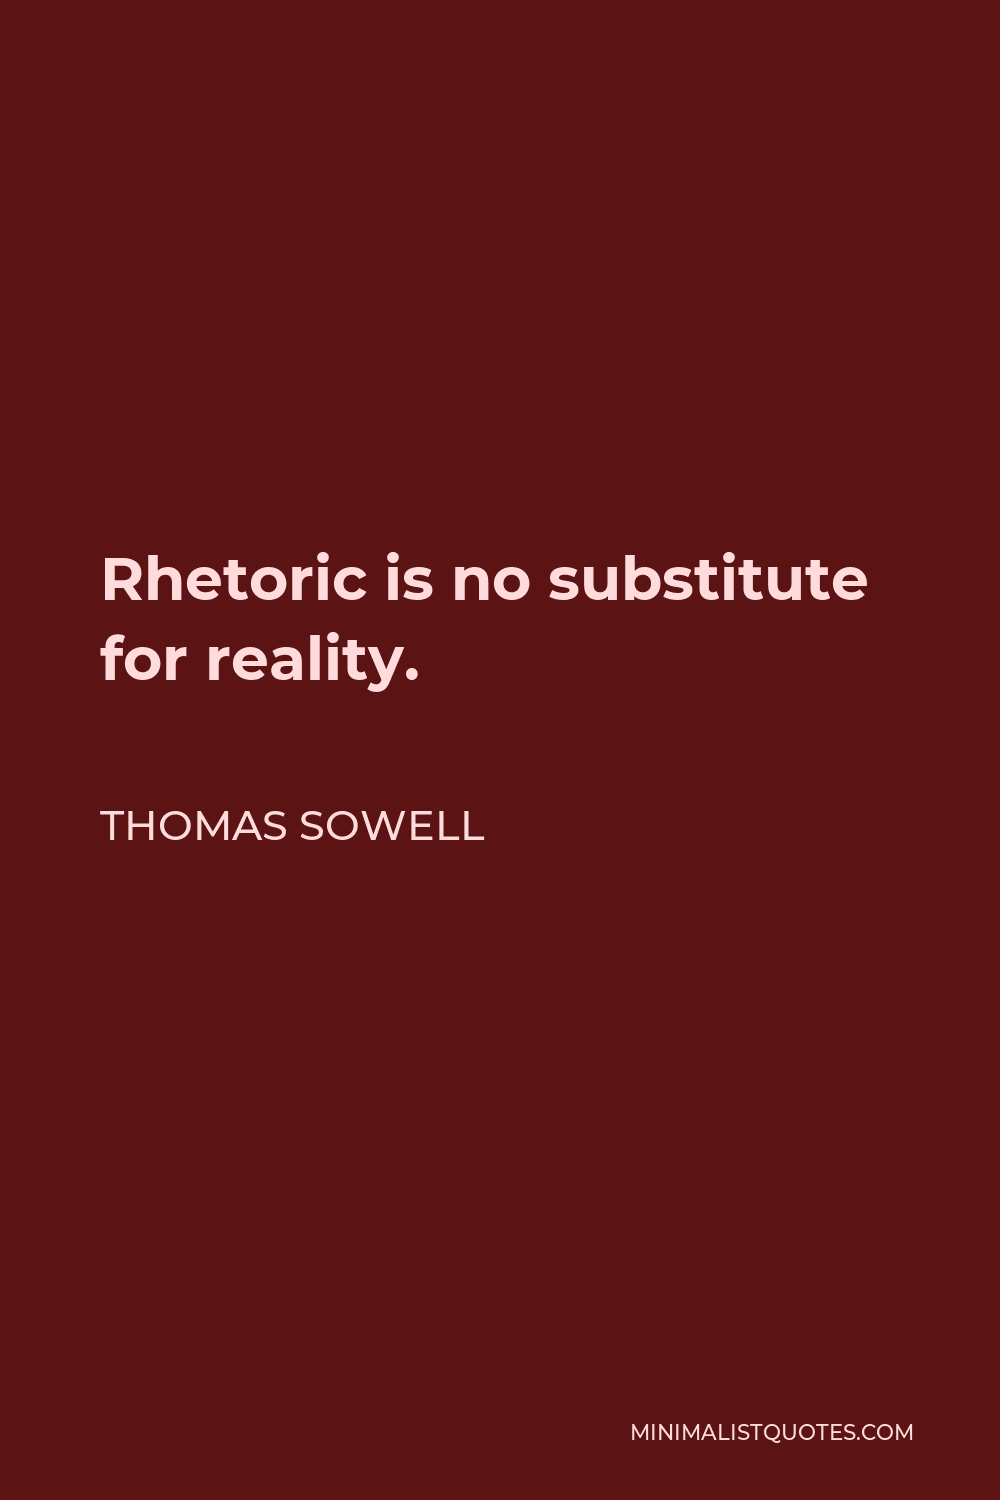 Thomas Sowell Quote - Rhetoric is no substitute for reality.